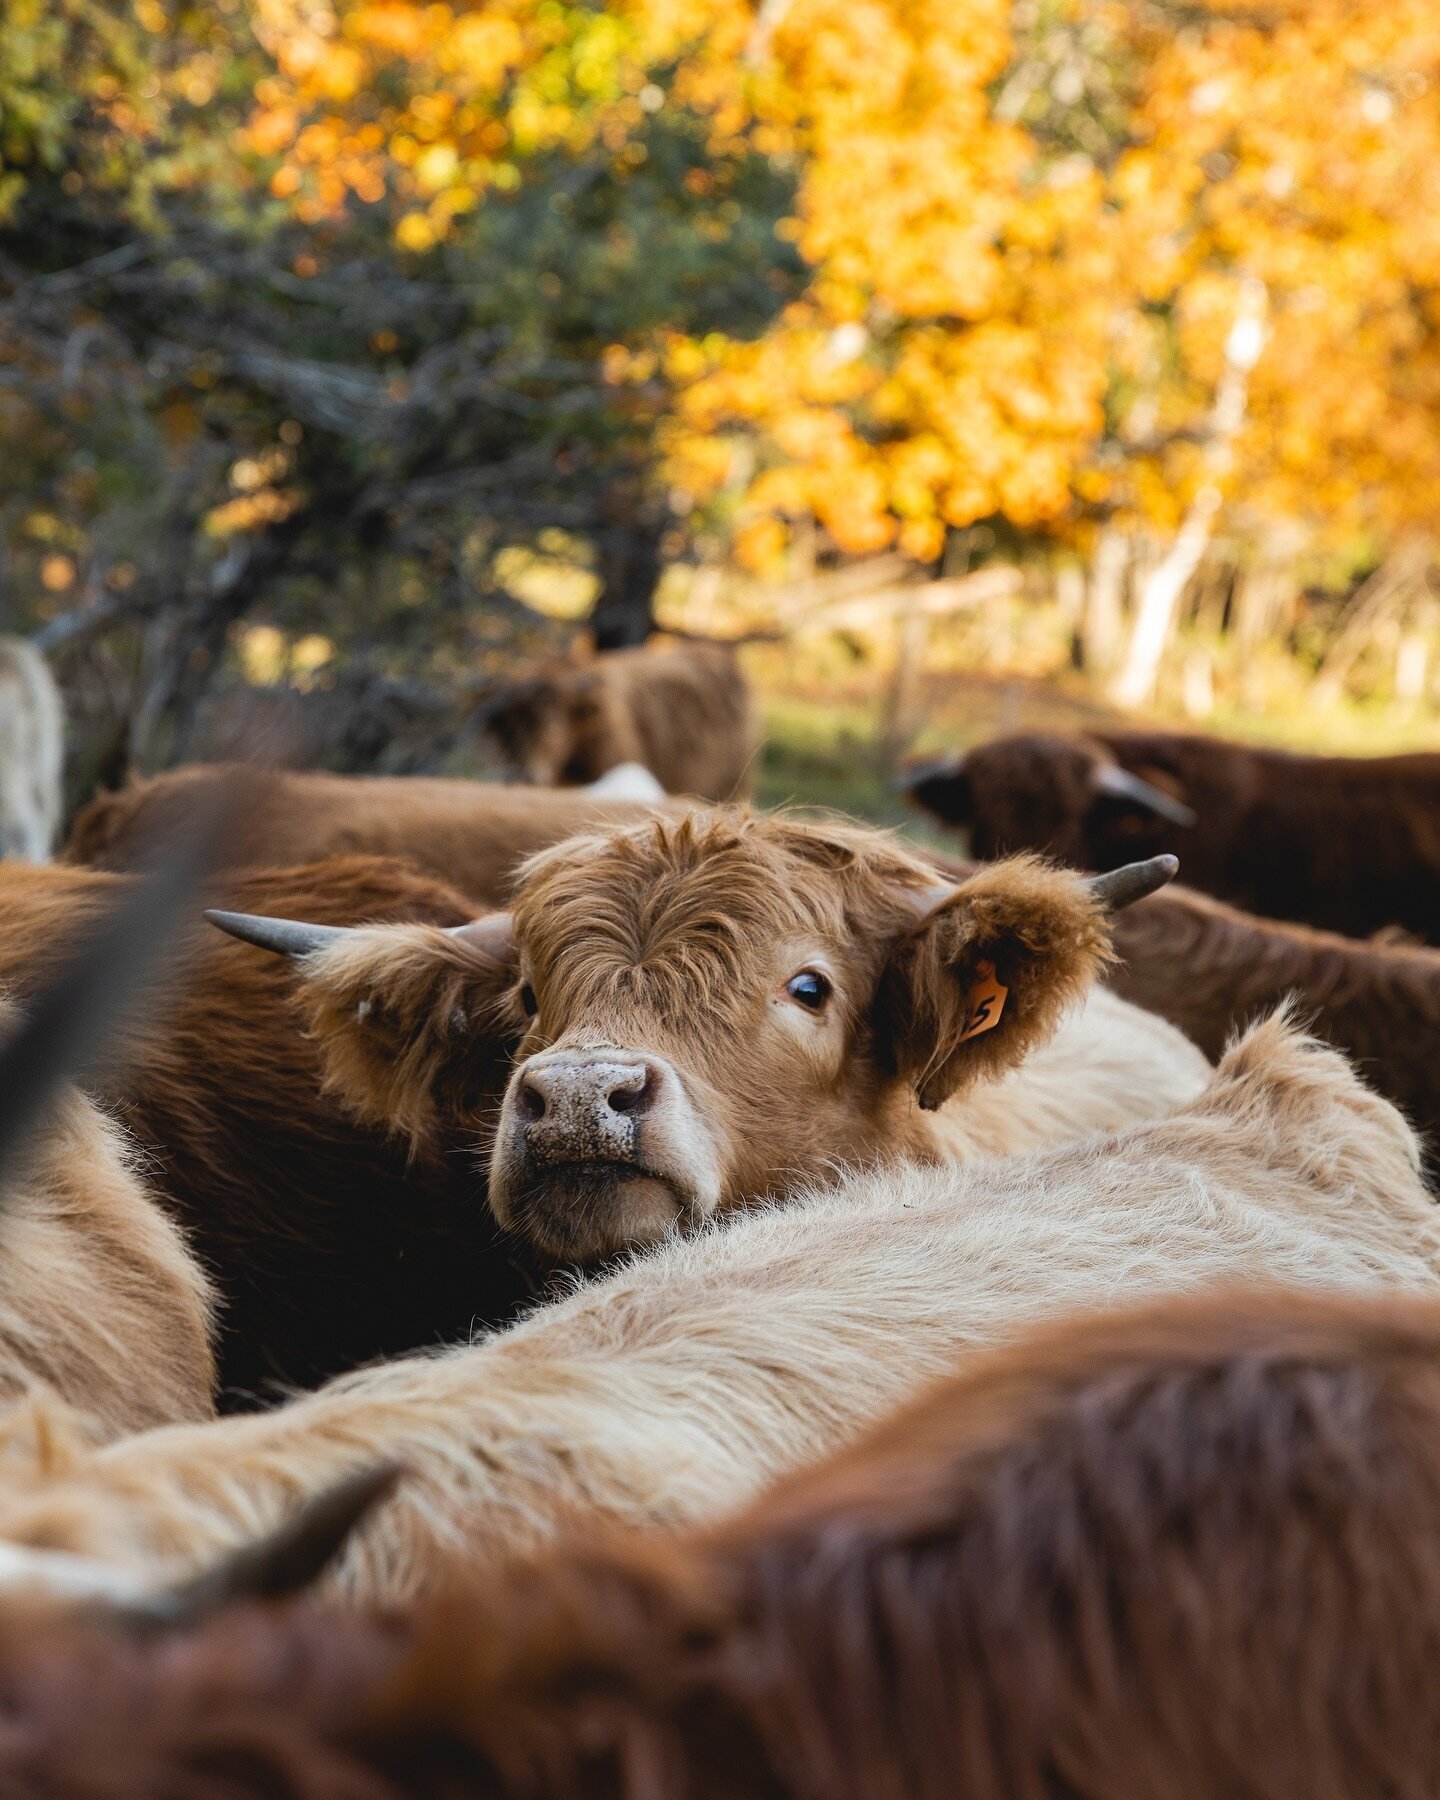 Just a little crowed // Just this fluffy dude stuck in the crowd. I love these cows and I loved this day from a past Fall visit to Vermont. Good times.